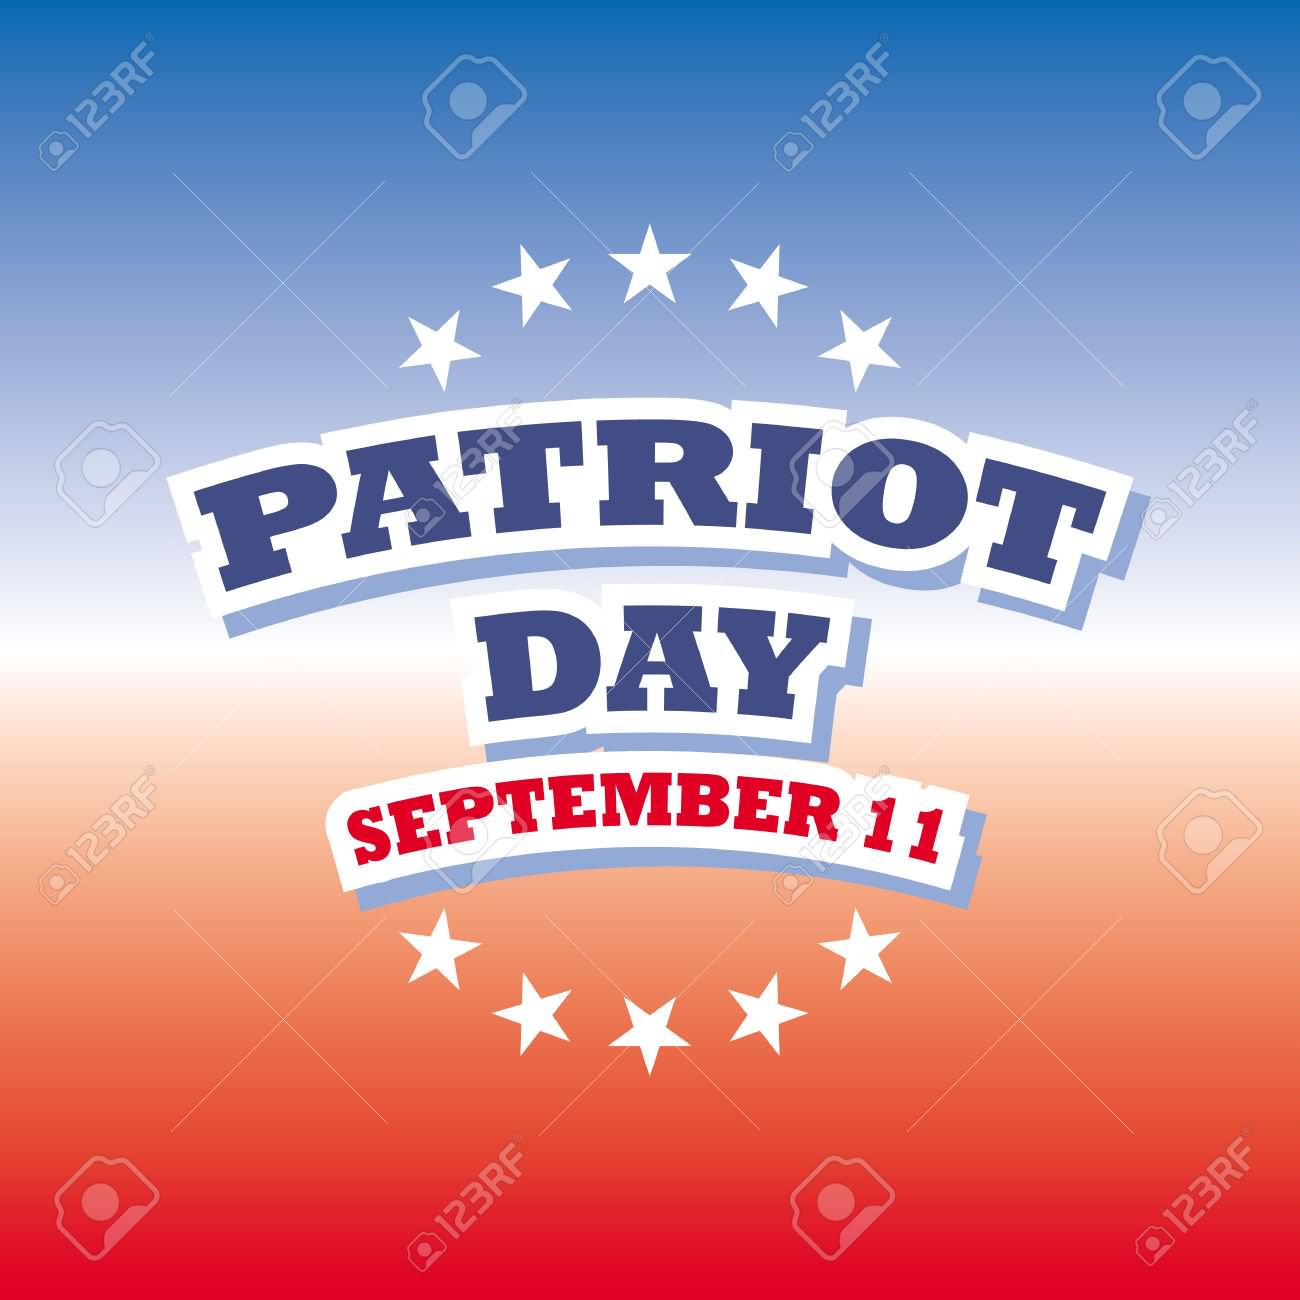 Patriot Day September 11 Picture For Facebook